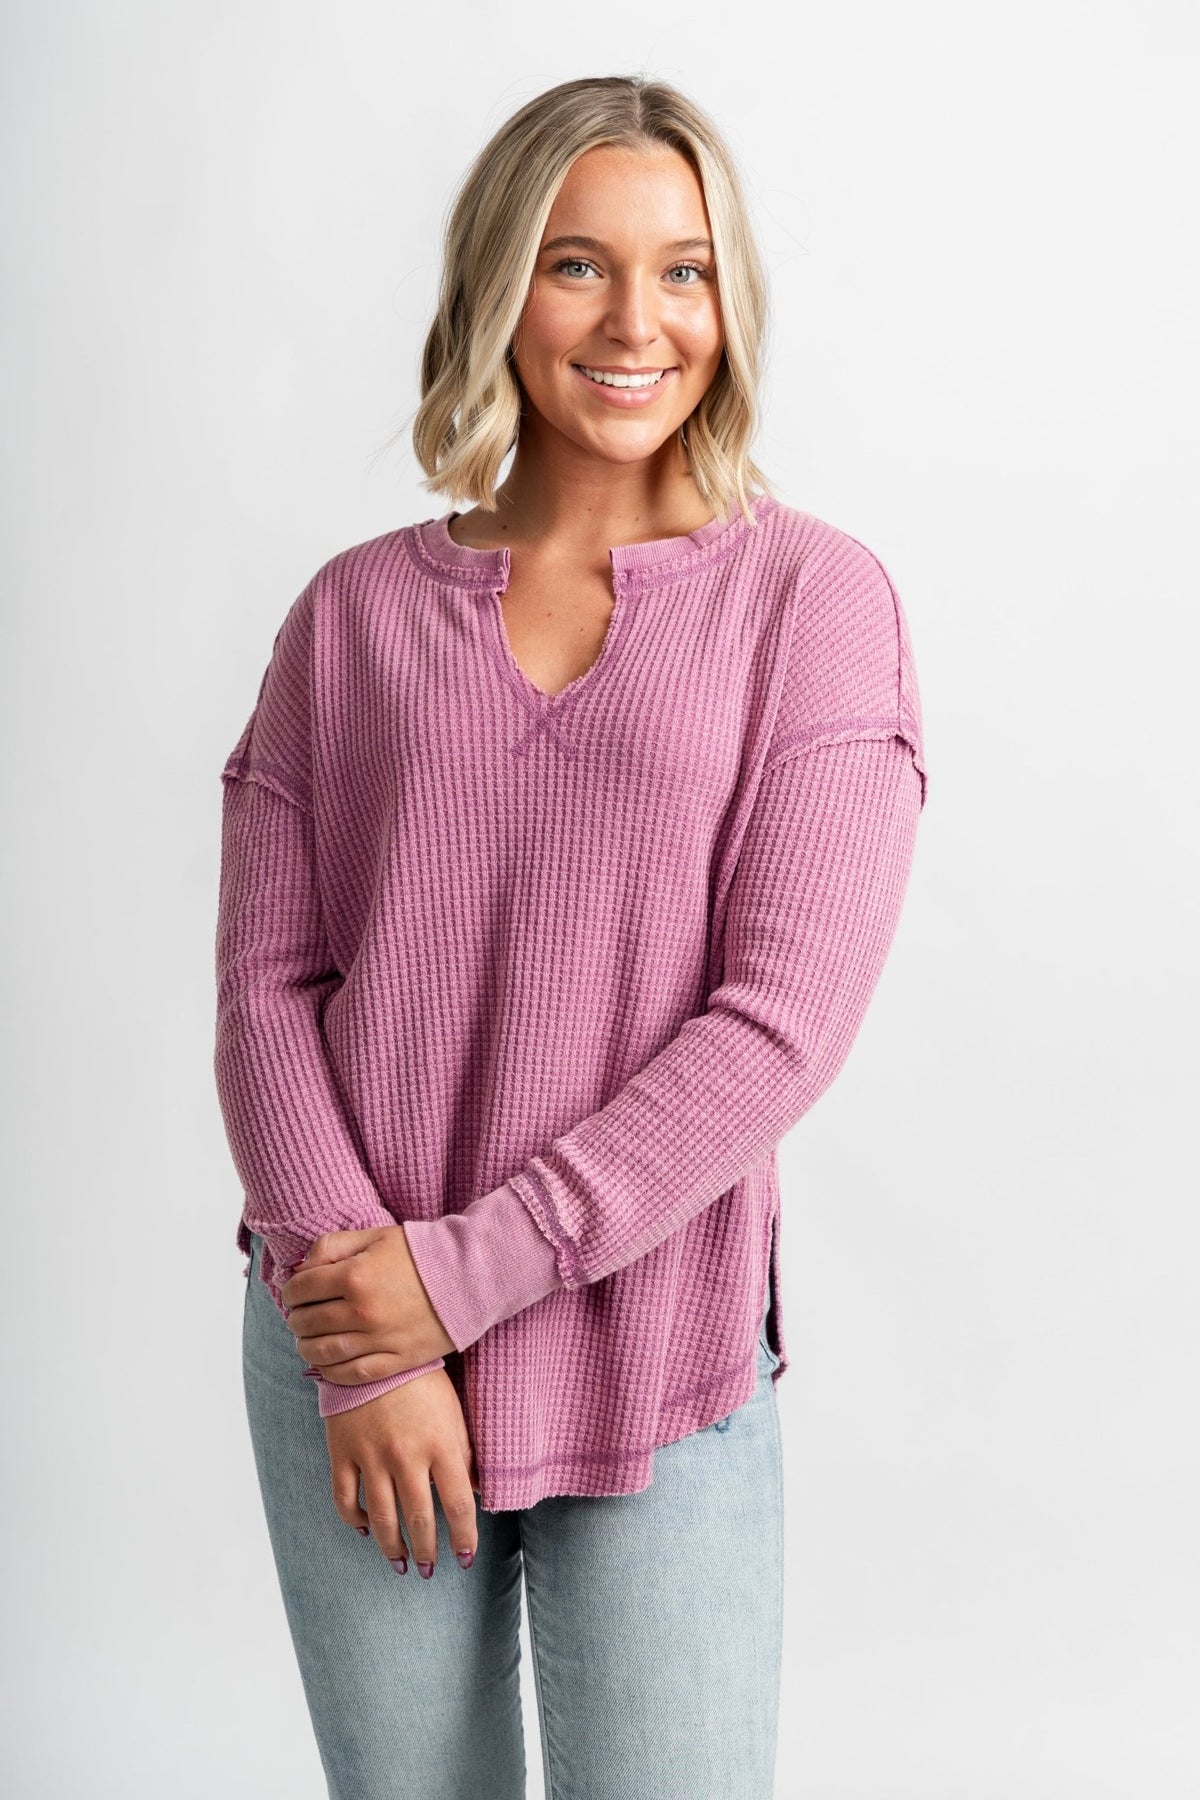 Z Supply thermal long sleeve top azalea - Z Supply top - Z Supply Tops, Dresses, Tanks, Tees, Cardigans, Joggers and Loungewear at Lush Fashion Lounge